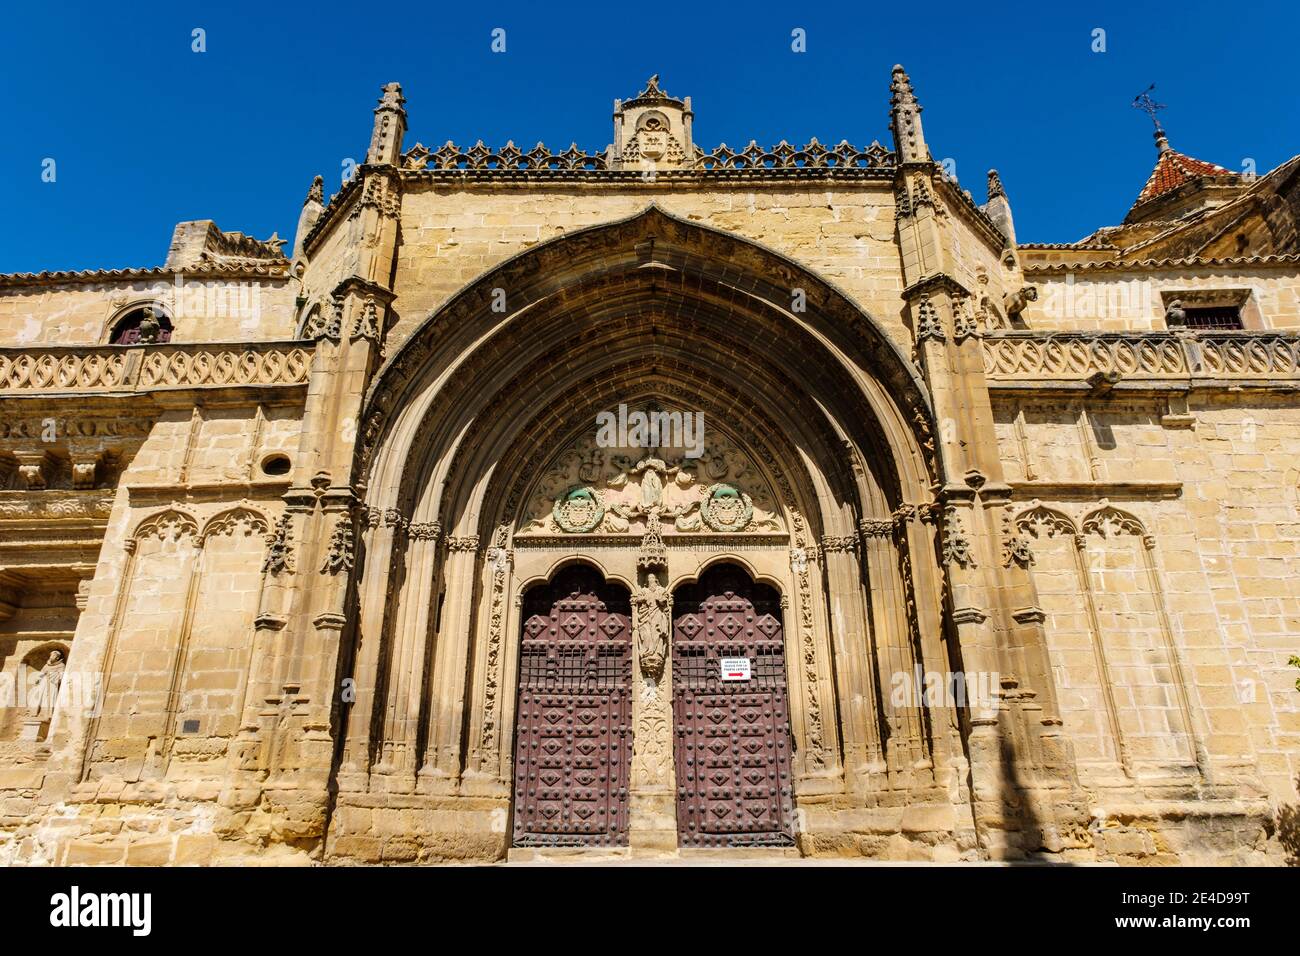 Church of San Pablo. Gothic style medieval temple from the 13th century, Ubeda, UNESCO World Heritage Site. Jaen province, Andalusia, Southern Spain E Stock Photo